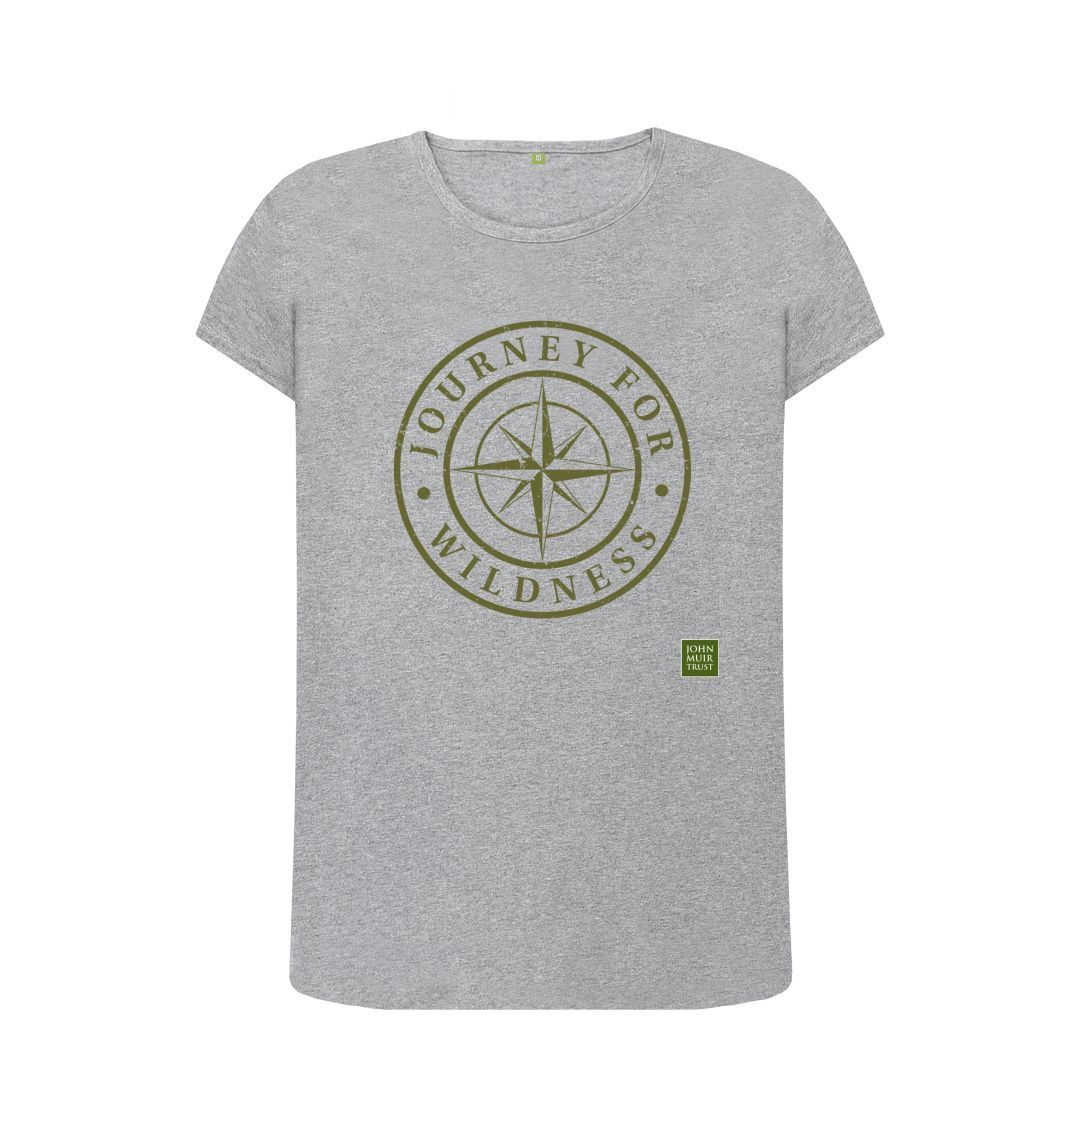 Athletic Grey Journey for Wildness Women's T-shirt (Olive logo design)